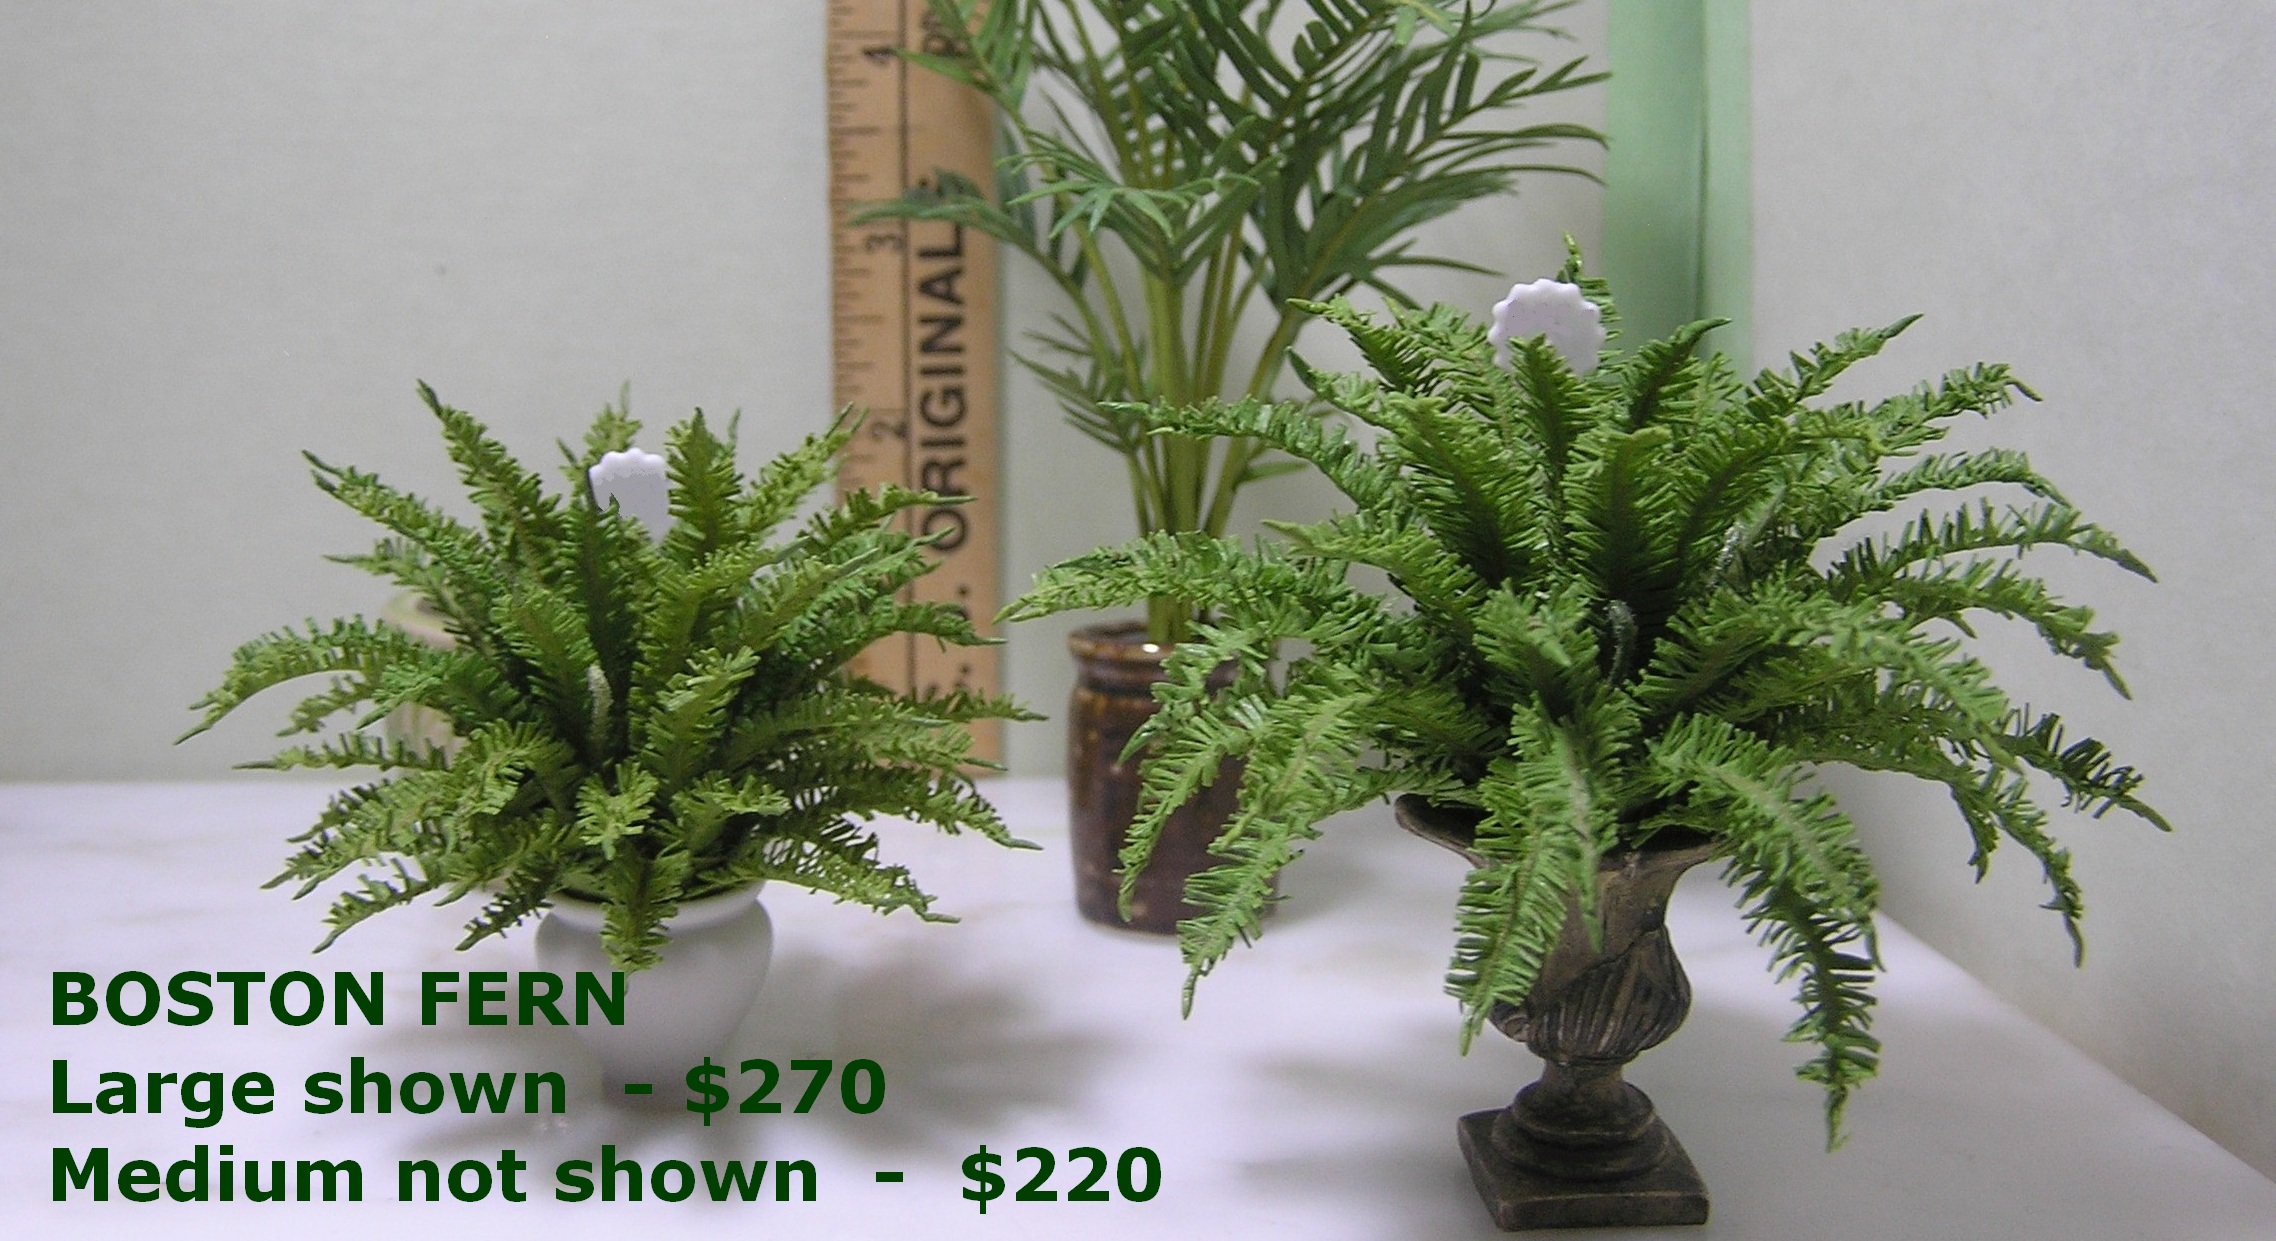 Ferns - Large examples